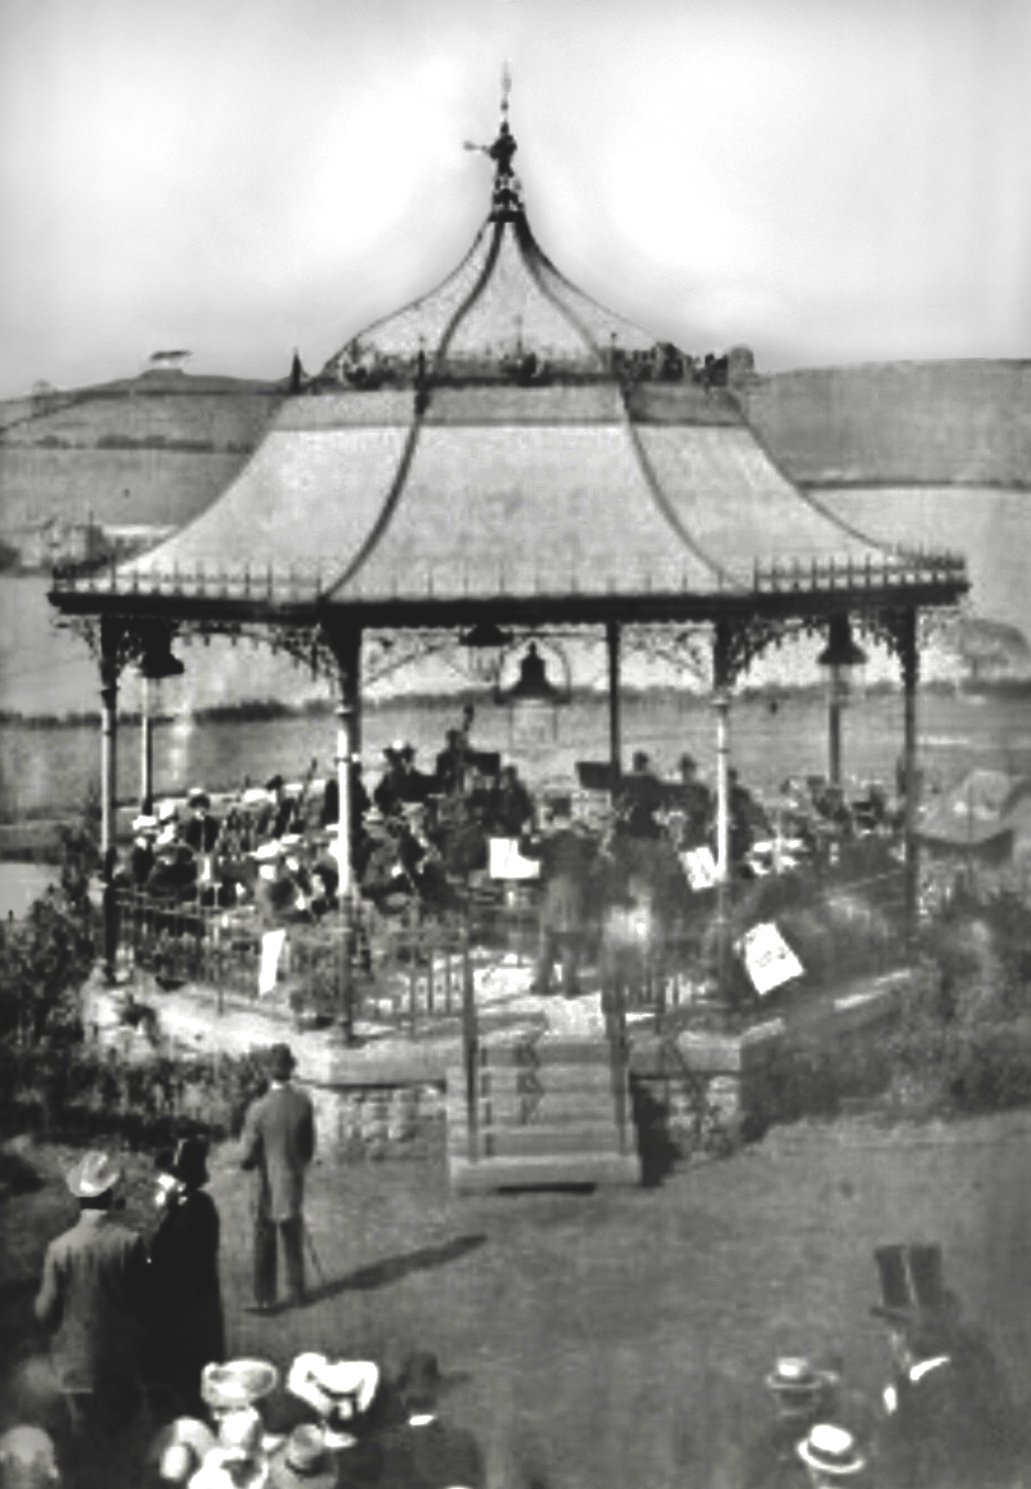 Bandstand, Woodhouse Ridge, early 1900s